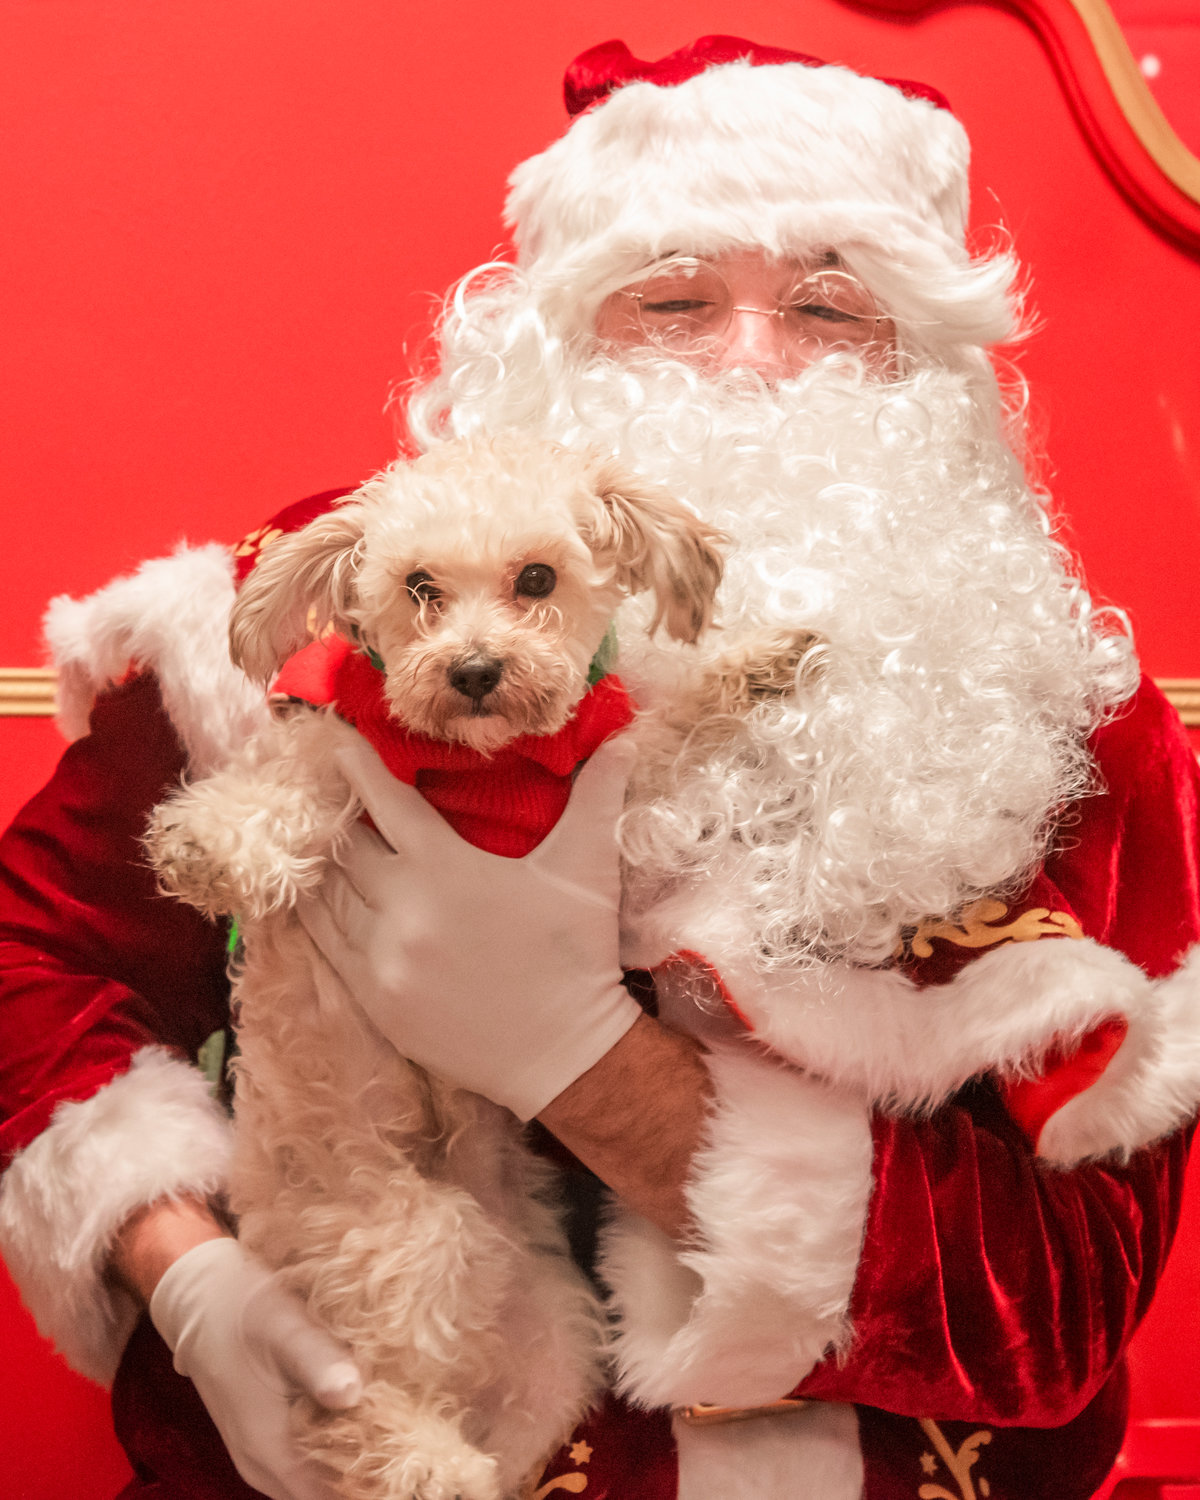 Joshua Workman dressed up as Santa poses for a photo with a puppy Saturday night inside the Mossyrock Community Center.